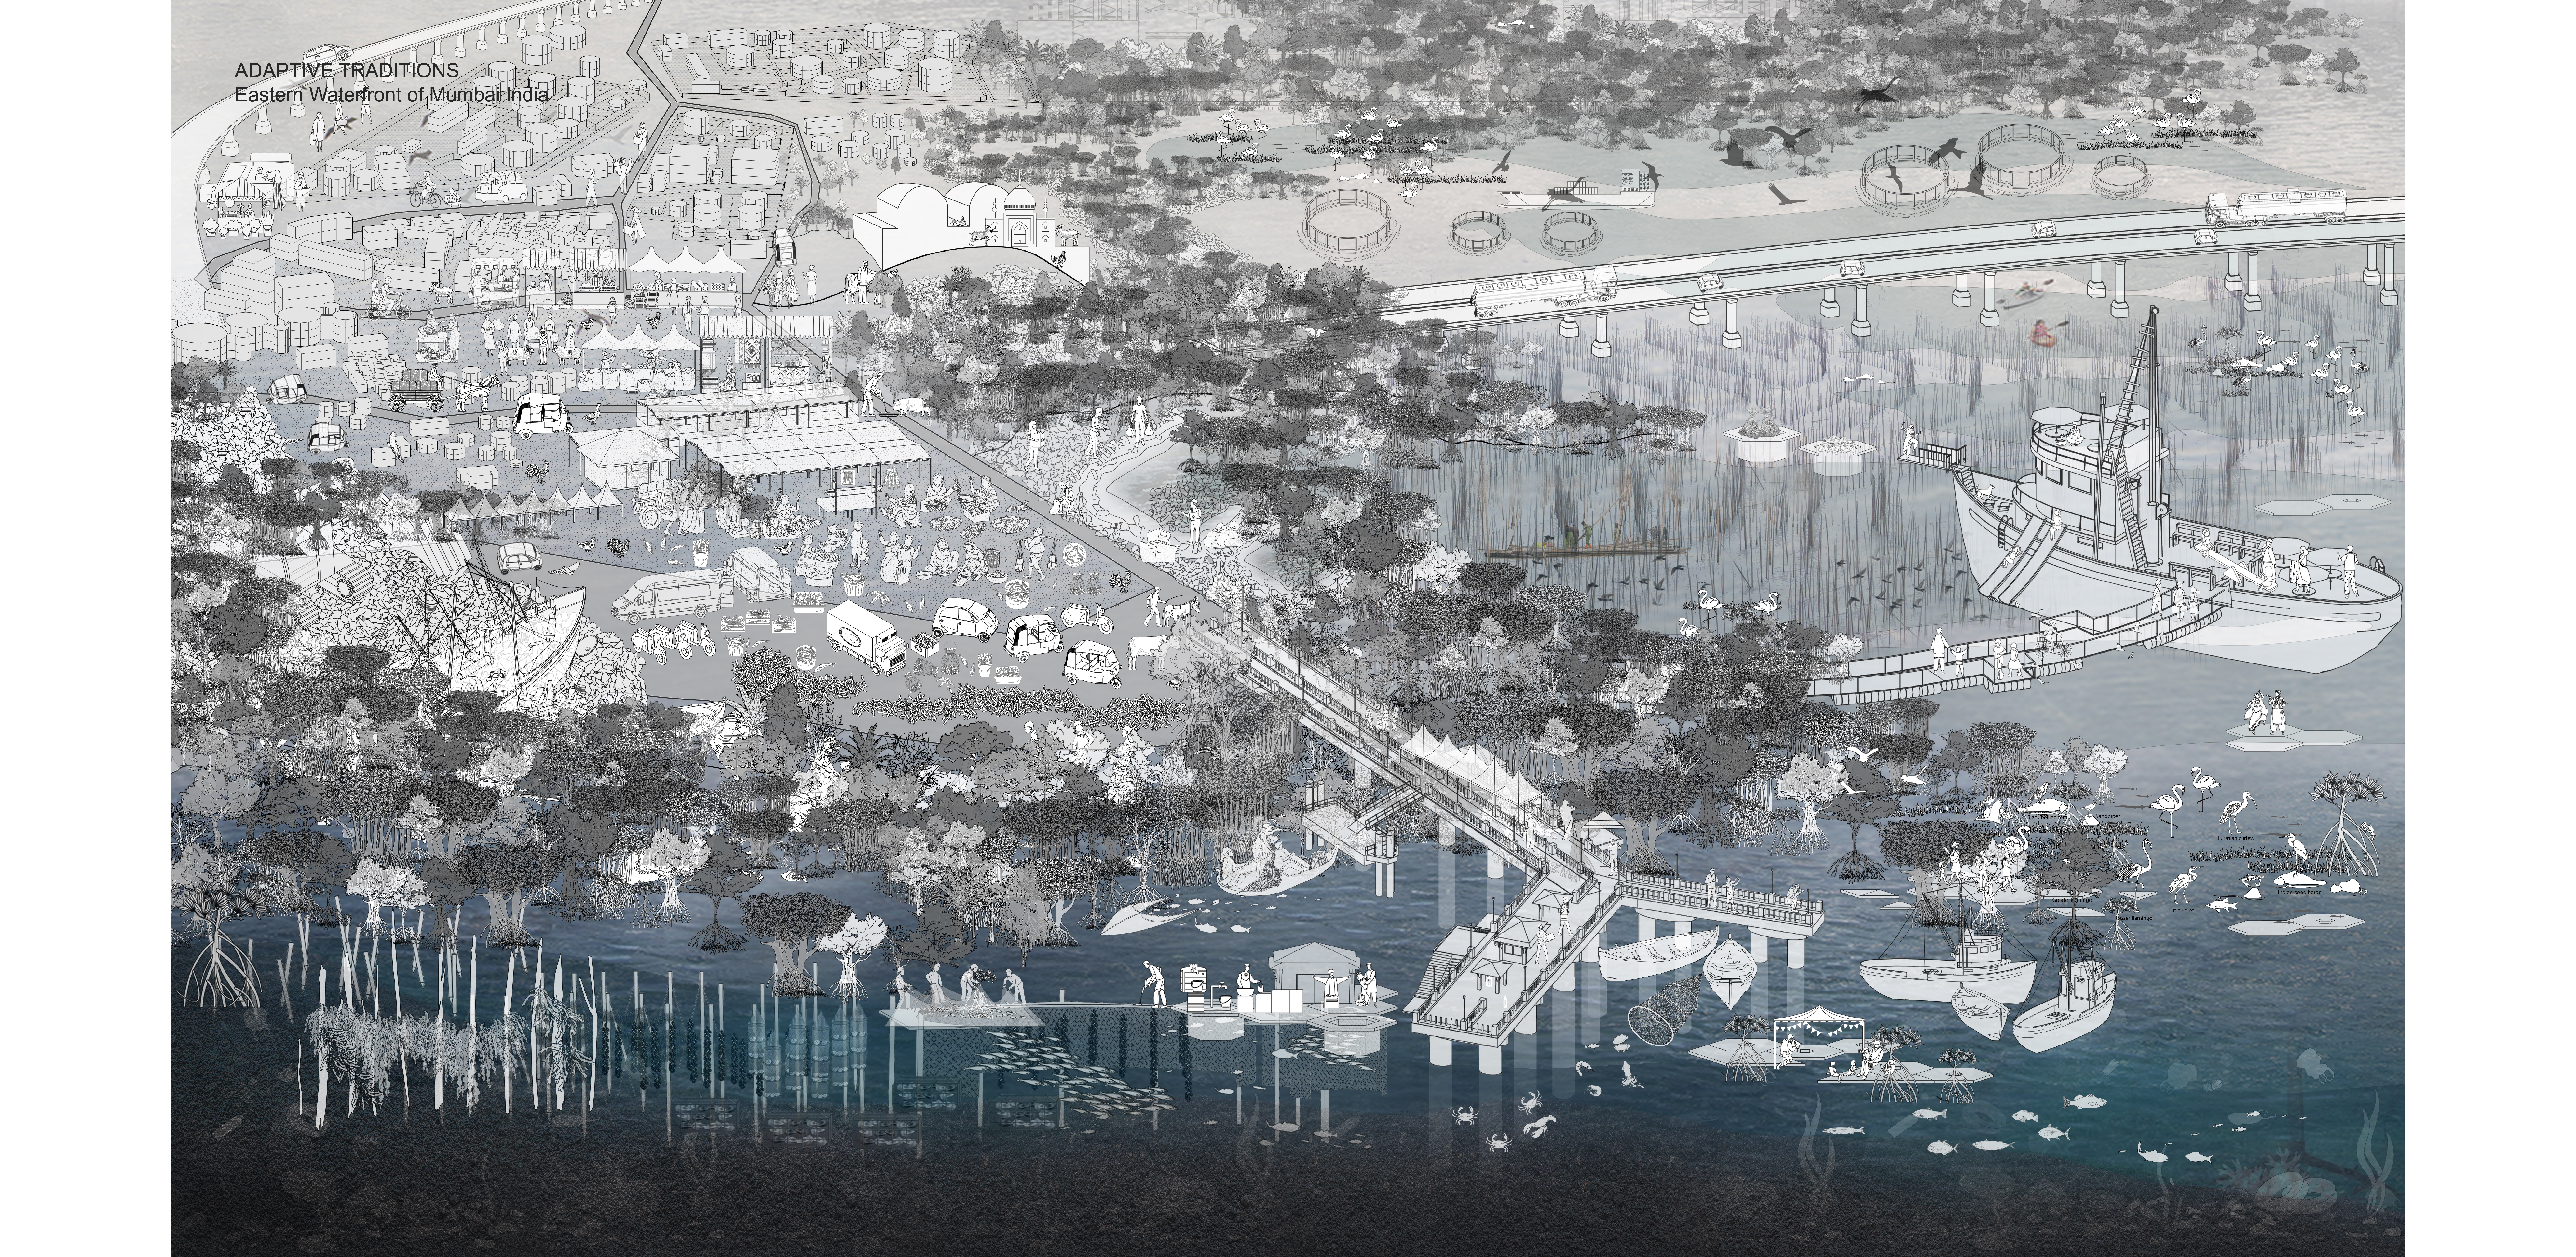 Adaptive Traditions of Eastern Waterfront in Mumbai, India